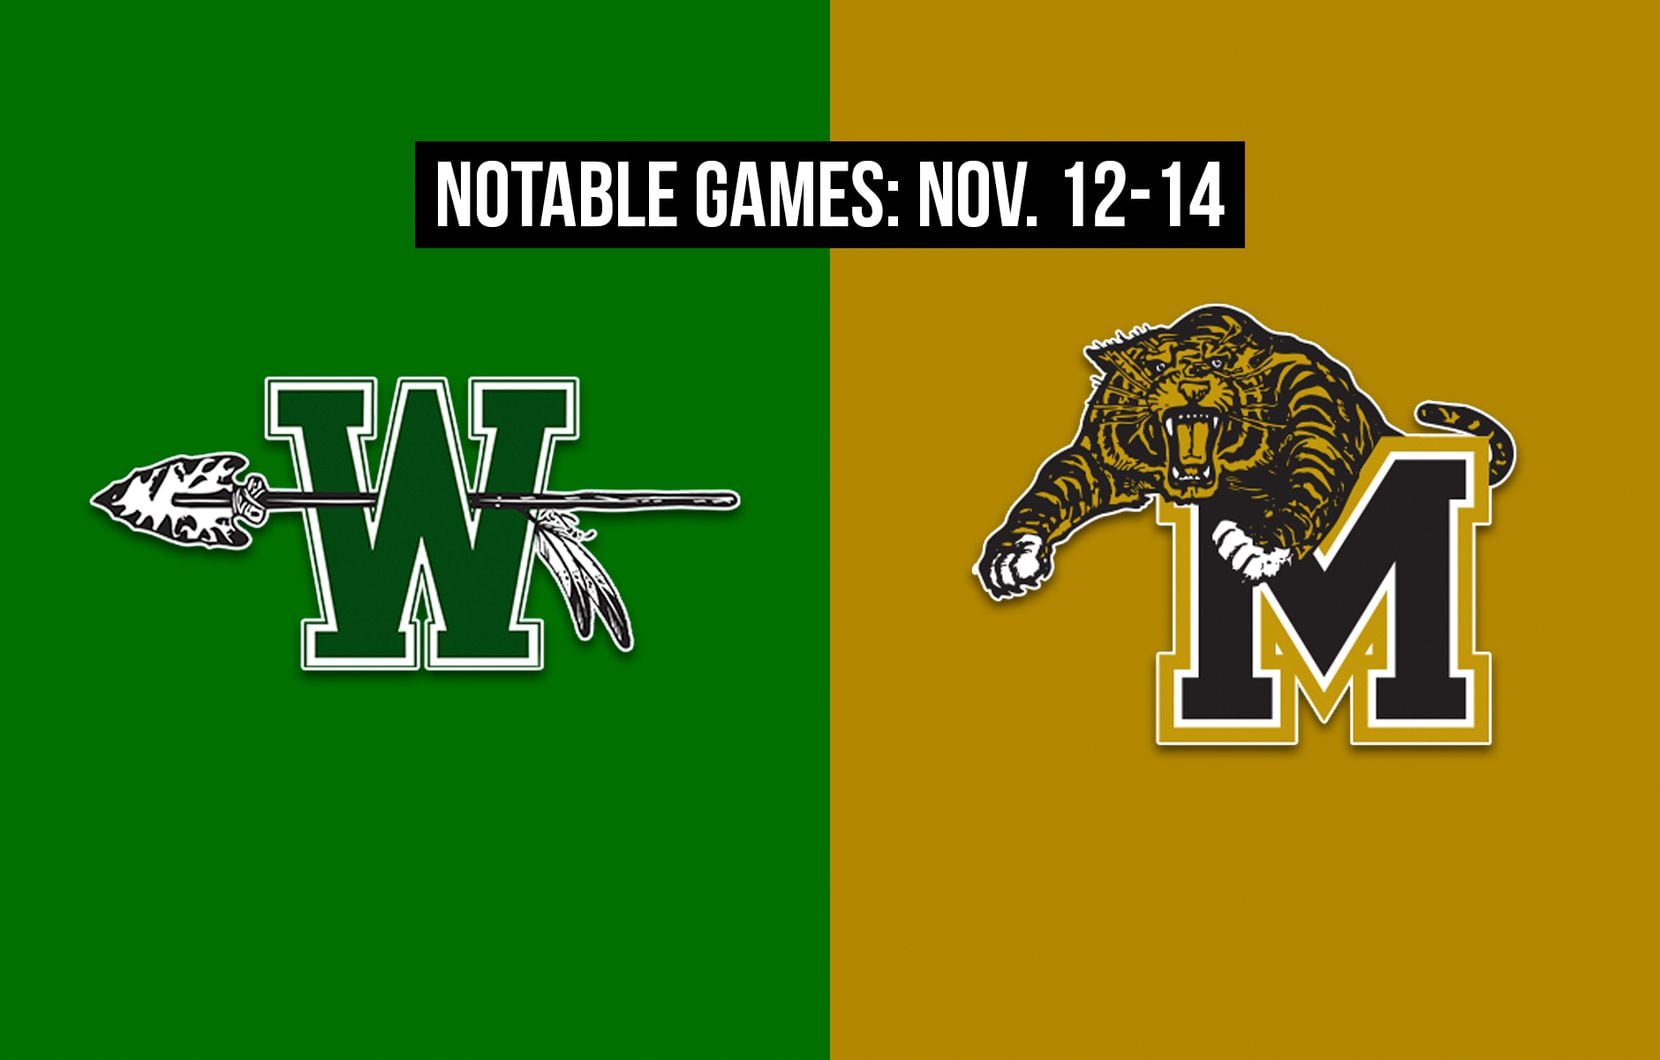 Notable games for the week of Nov. 12-14 of the 2020 season: Waxahachie vs. Mansfield.